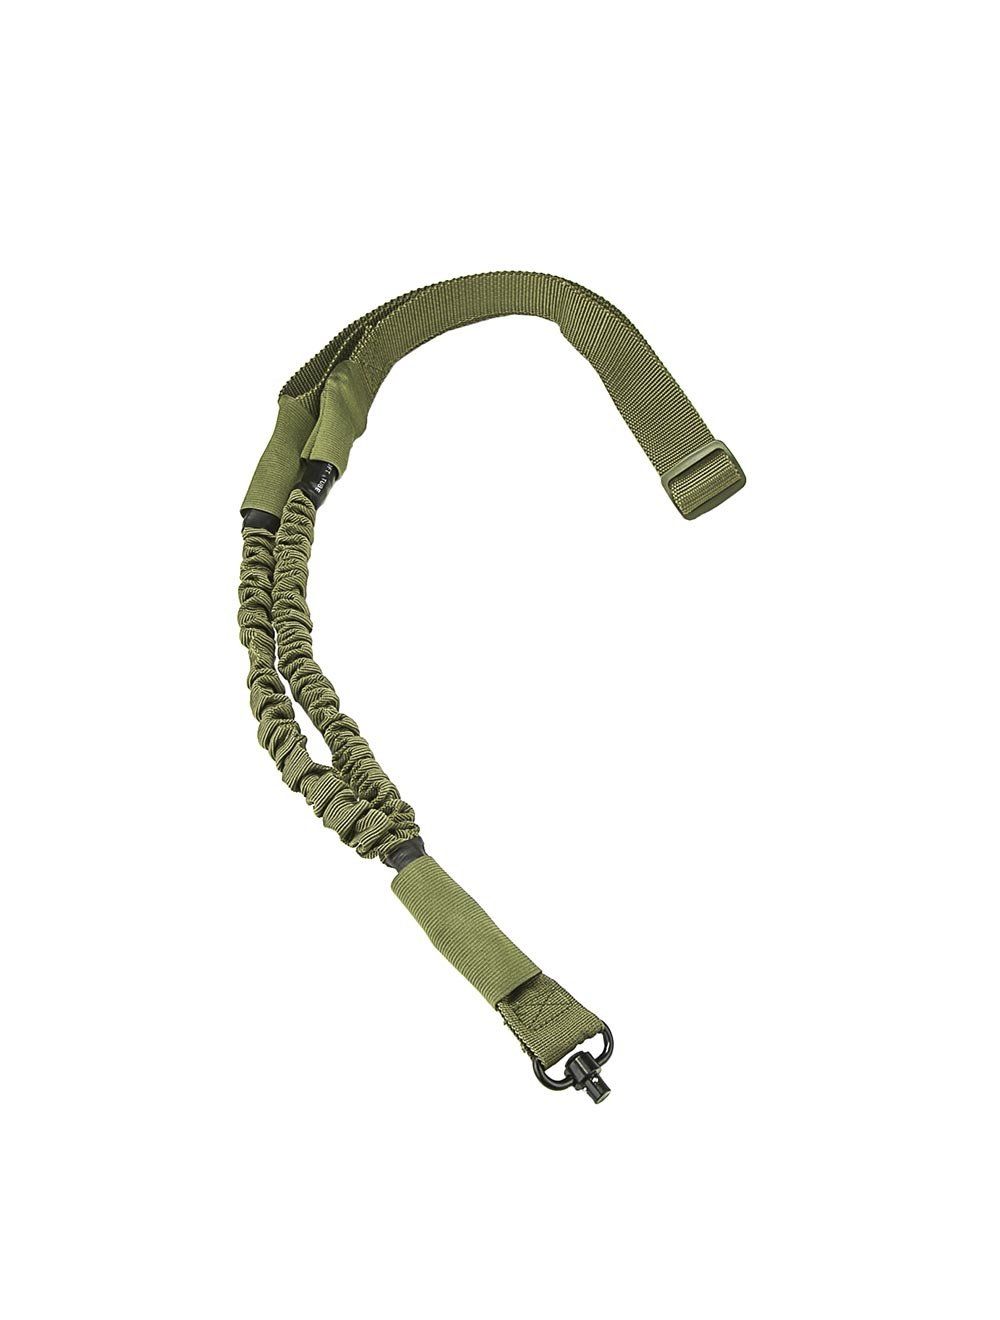 Single Point Bungee Sling with QD Swivel